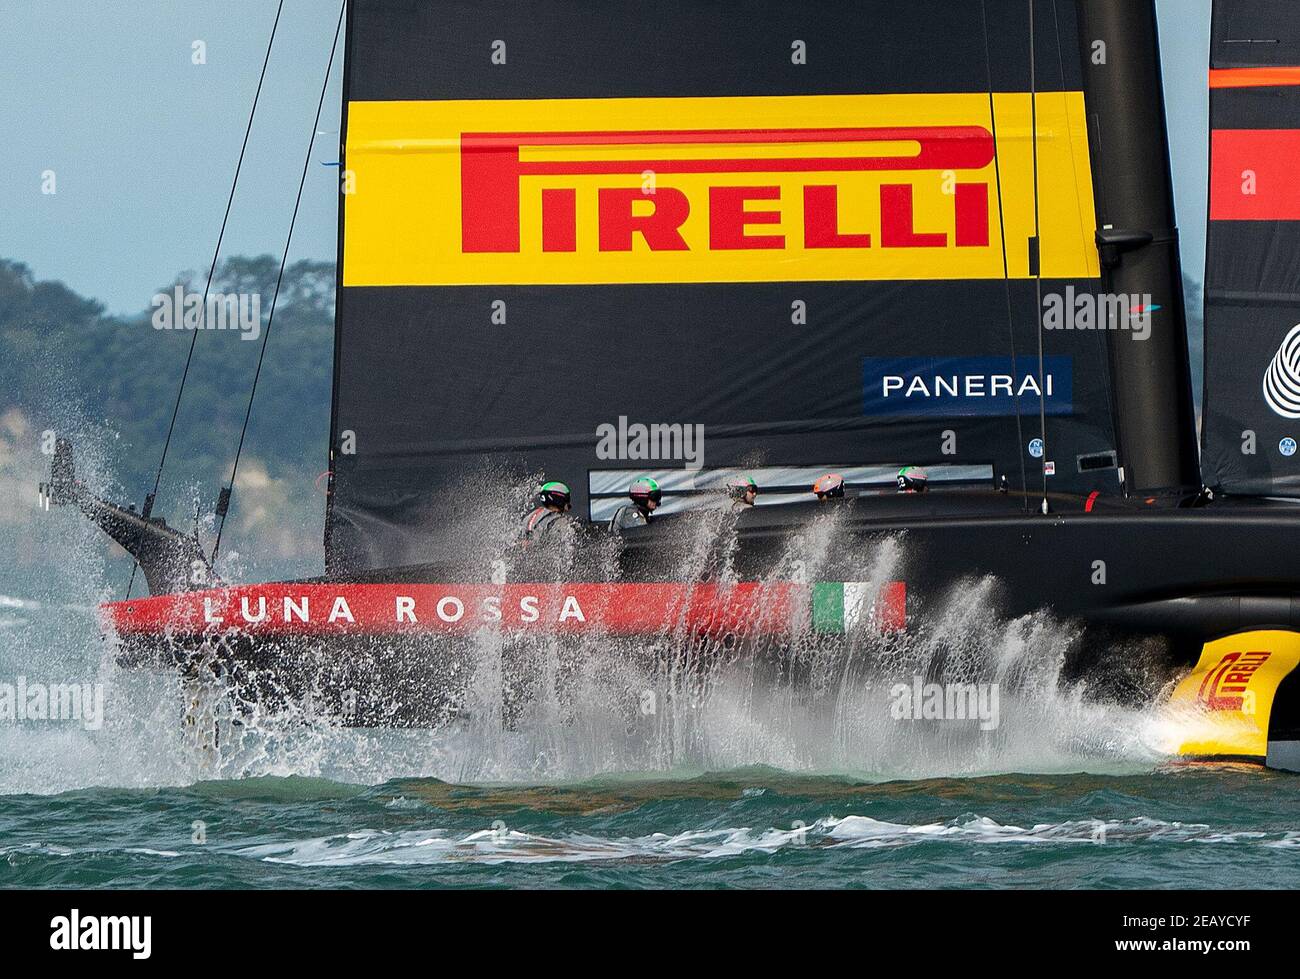 Auckland, New Zealand, 11 February, 2021 -  Italian team Luna Rossa Prada Pirelli practice on the Waitemata Harbour ahead of the Prada Cup finals which starts on Saturday, February 13, 2021. Luna Rossa will battle INEOS Team UK to determine who will challenge defenders Emirates Team New Zealand  in the 36th America's Cup series which starts on March 6. Credit: Rob Taggart/Alamy Live News Stock Photo